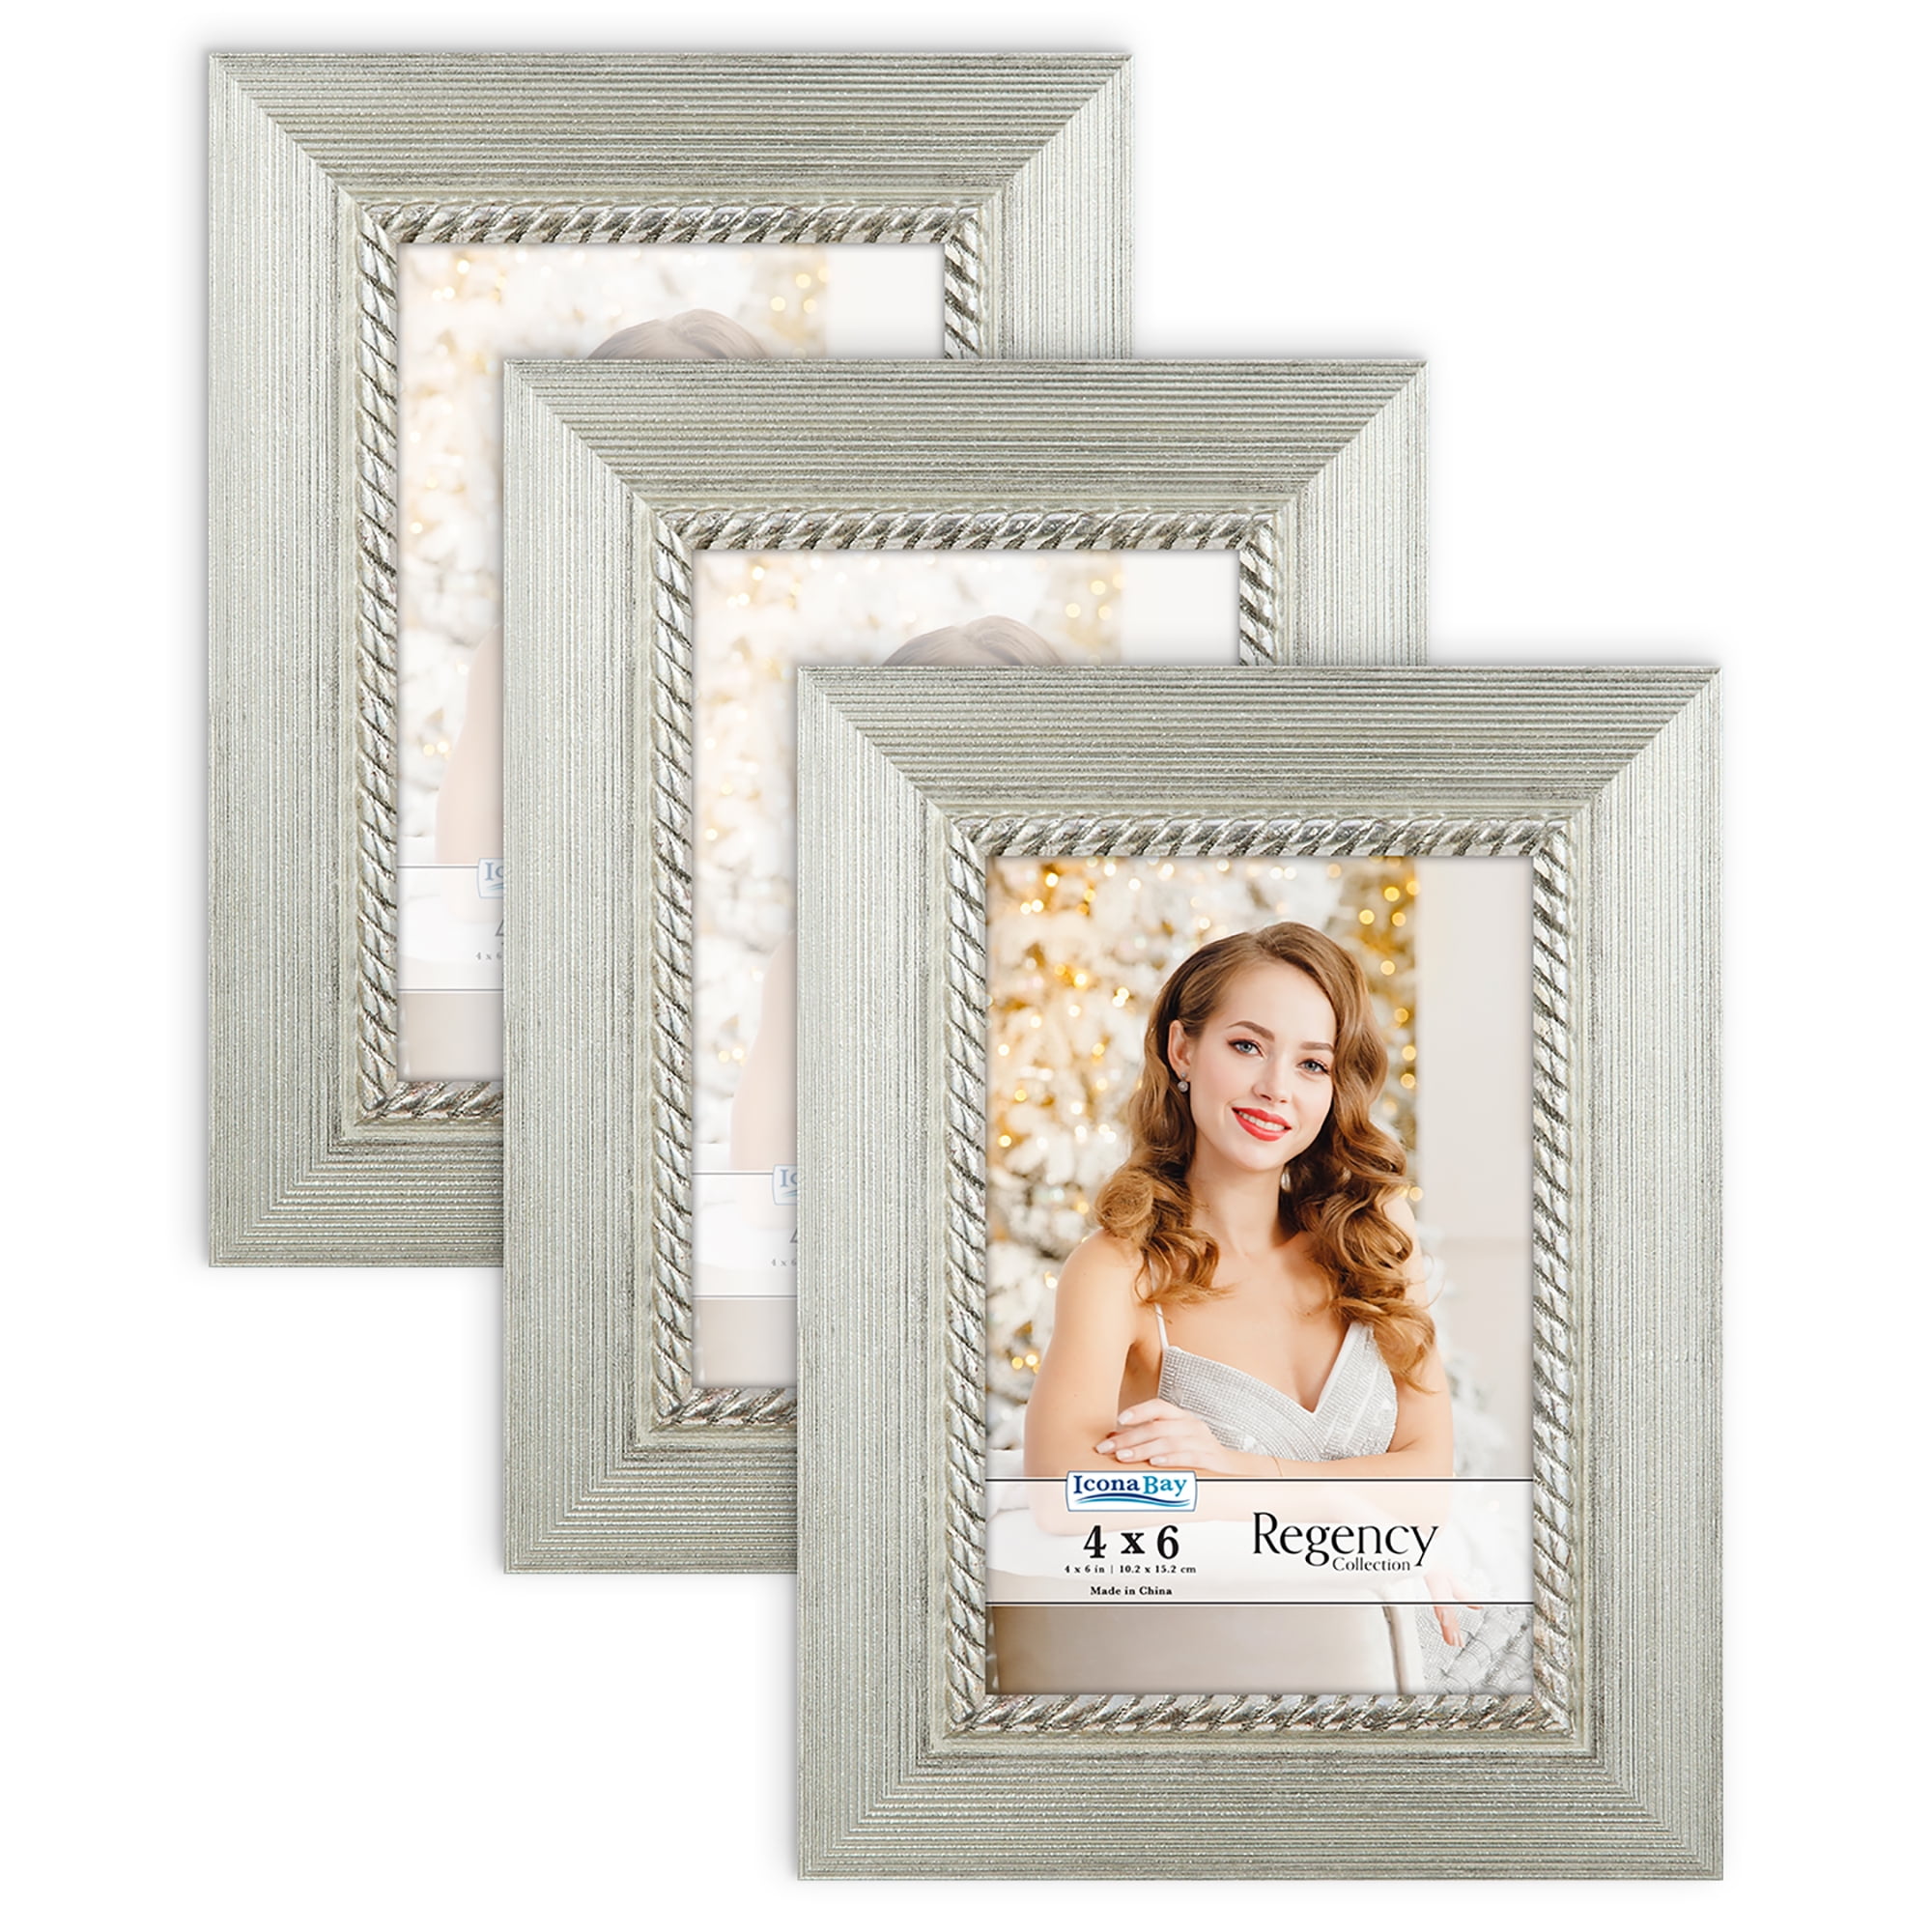 Icona Bay 4x6 Picture Frames (Black, 6 Pack), Sturdy Wood Composite Photo  Frames 4 x 6, Sleek Design, Table Top or Wall Mount, Exclusives Collection